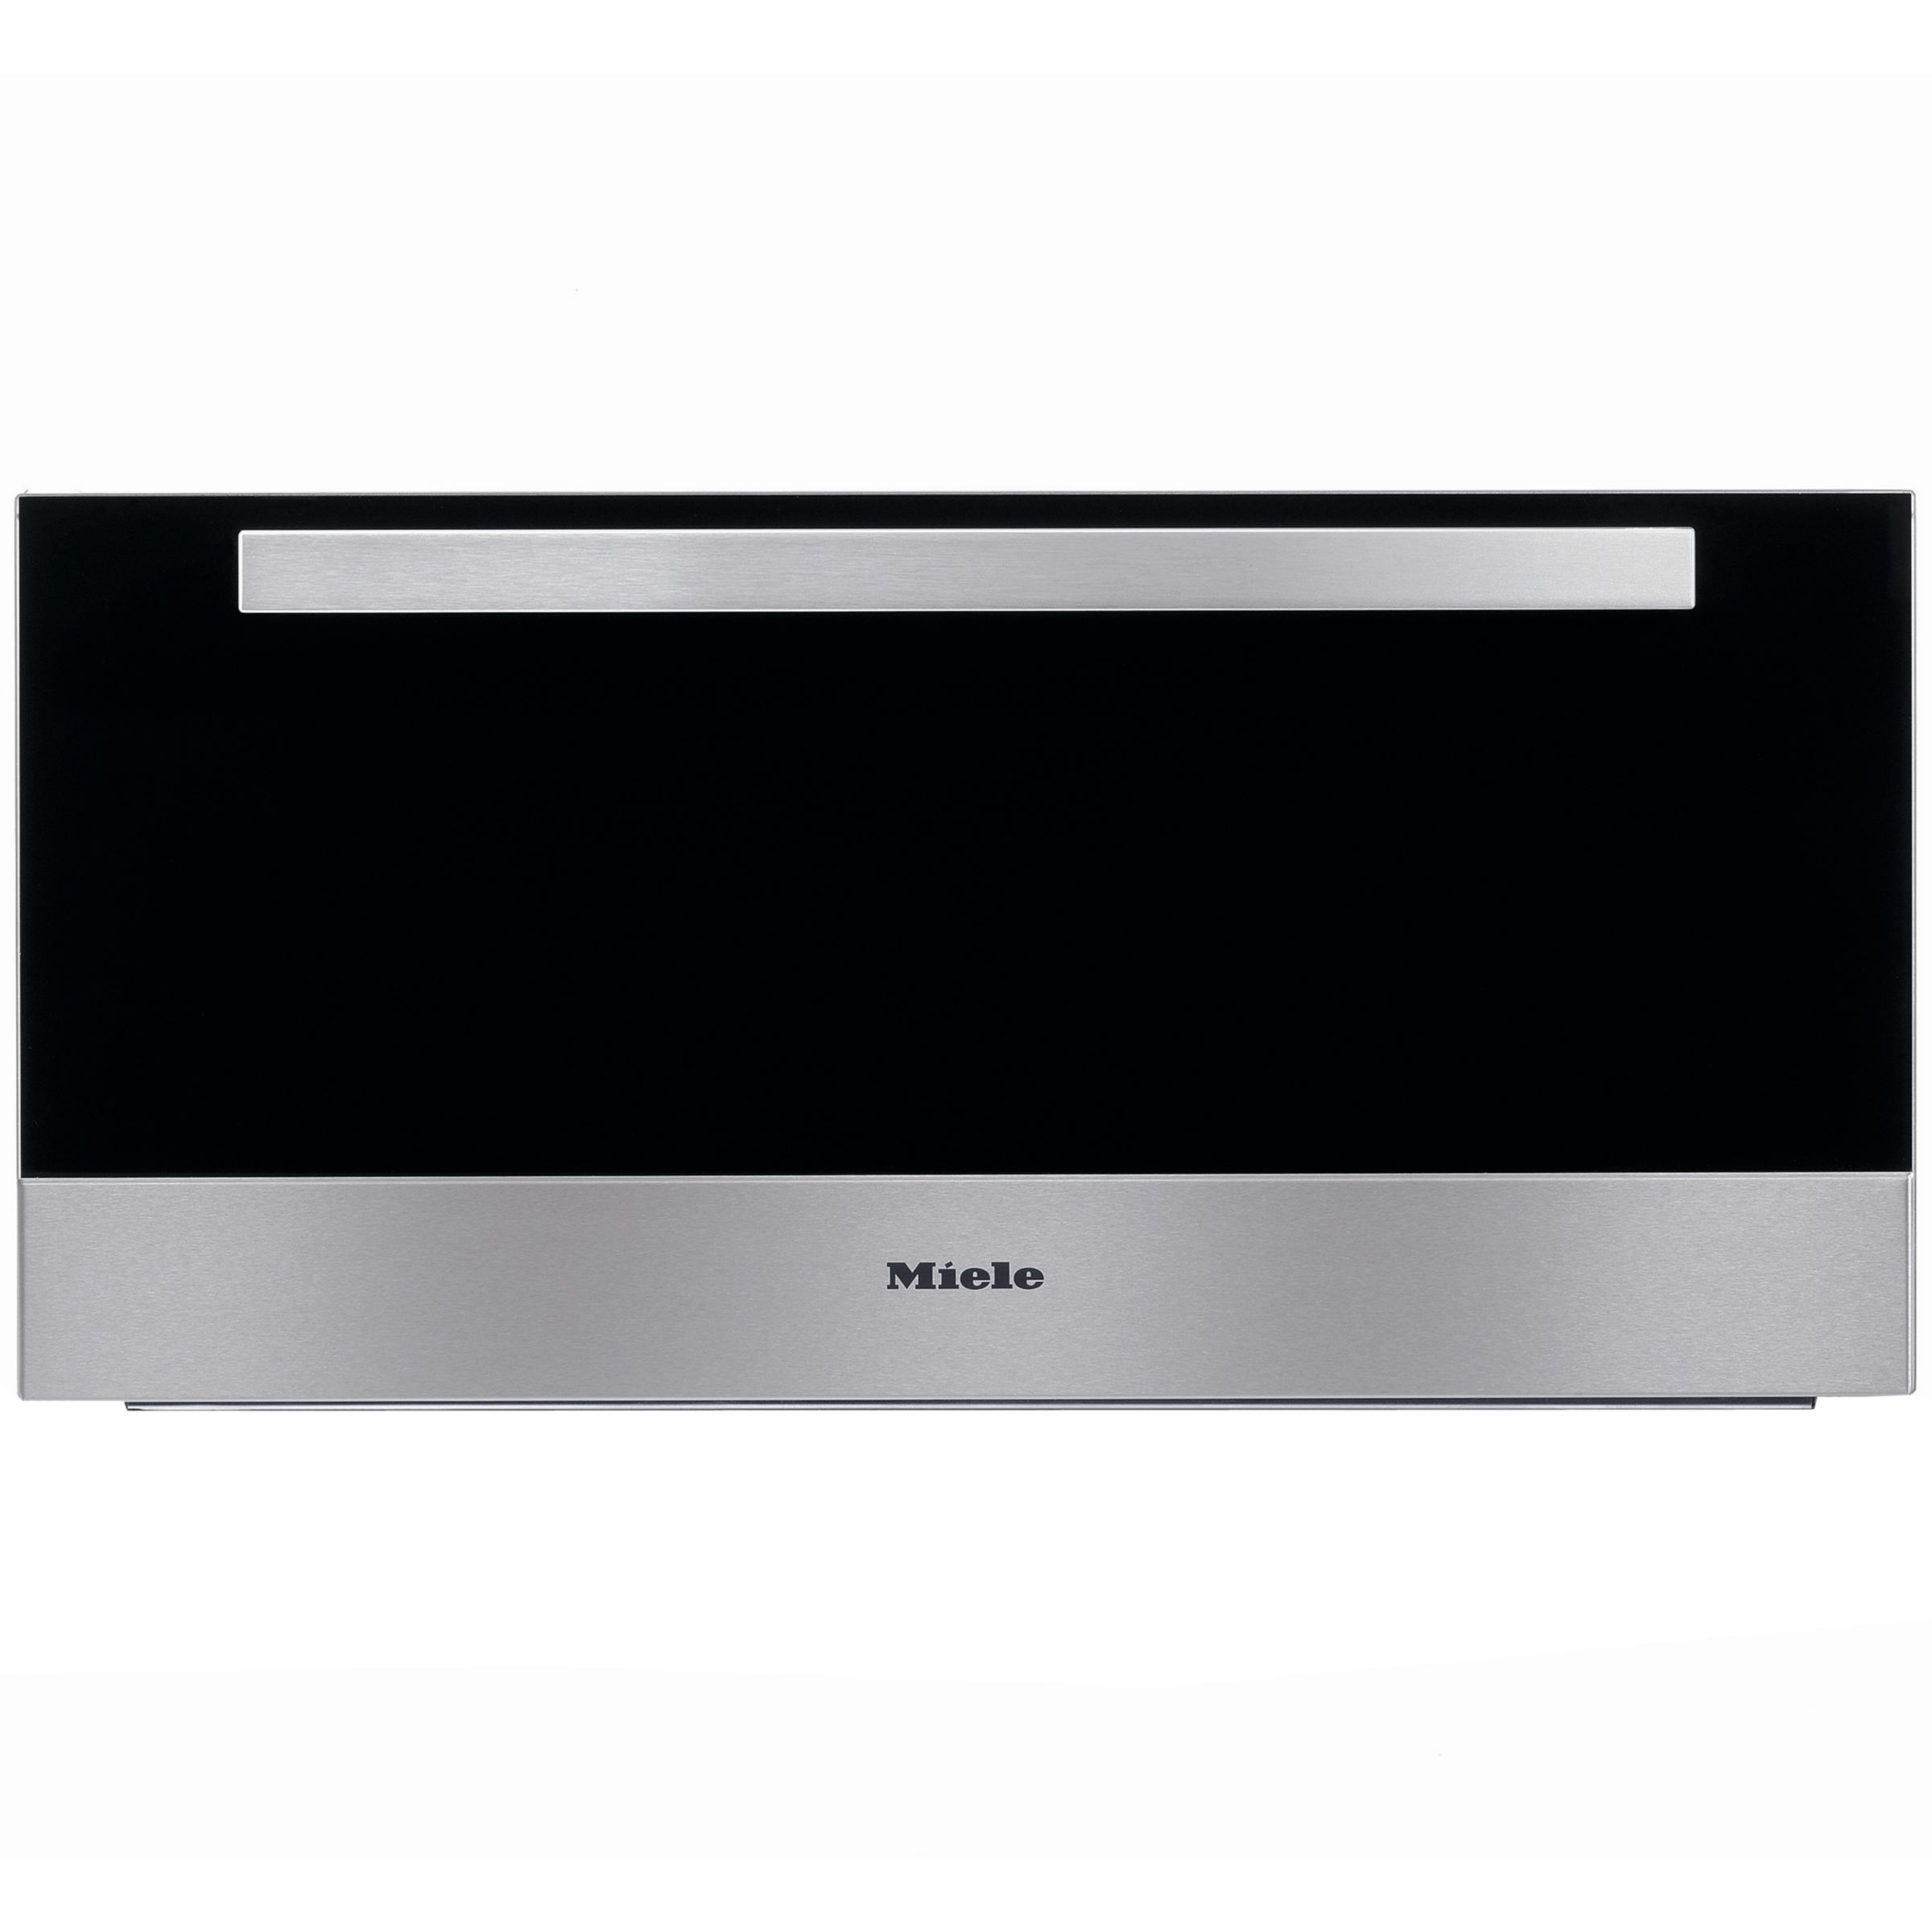 Miele ESW5080-29 Built-In Warming Drawer, Stainless Steel at John Lewis